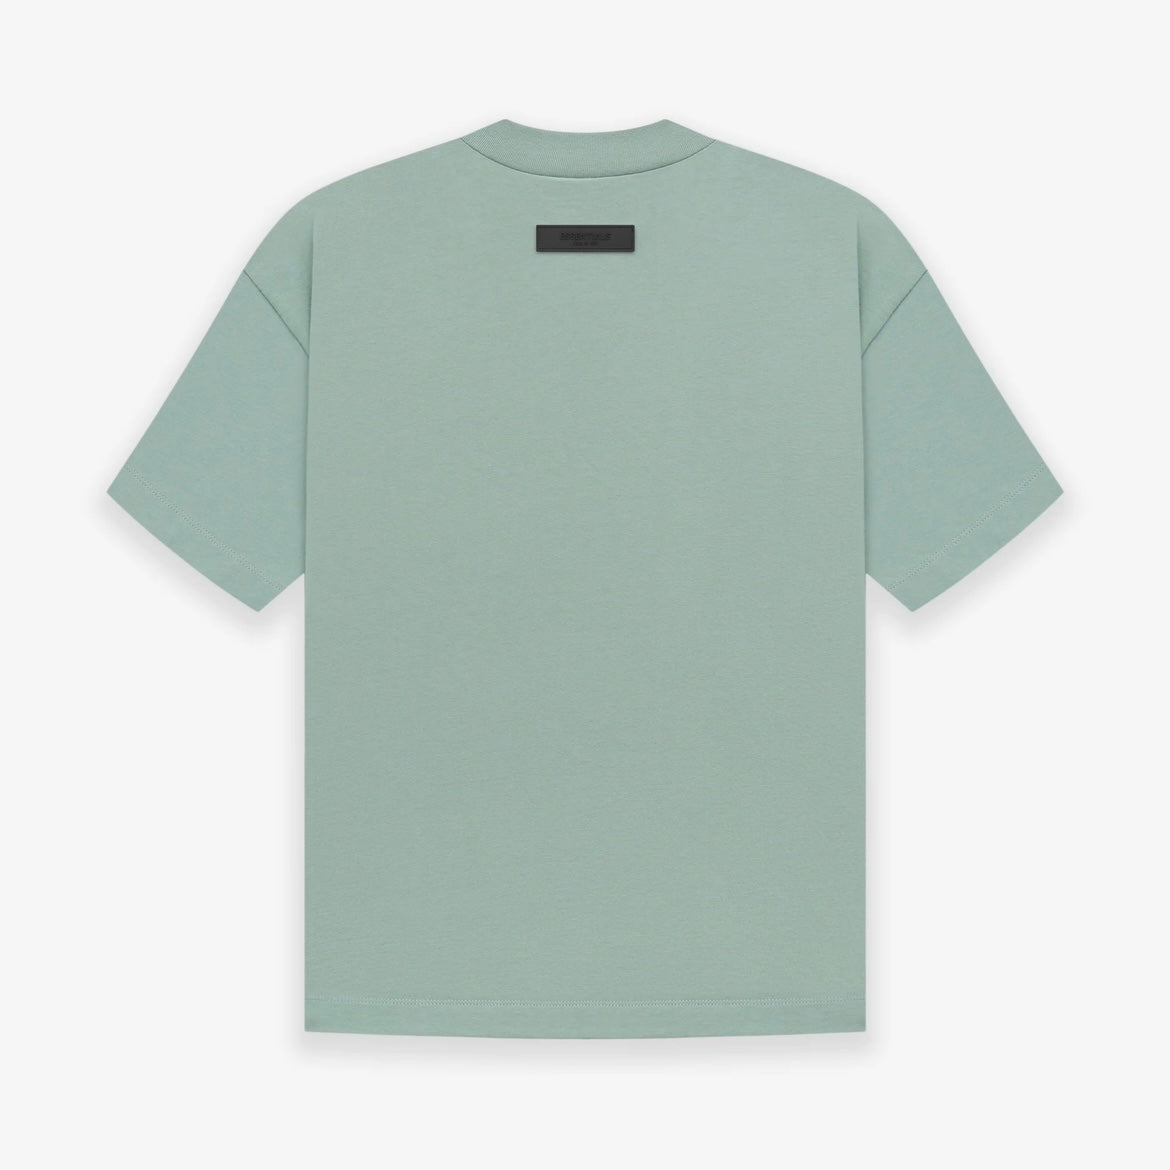 Fear of God Essentials Sycamore T-Shirt Back VIew